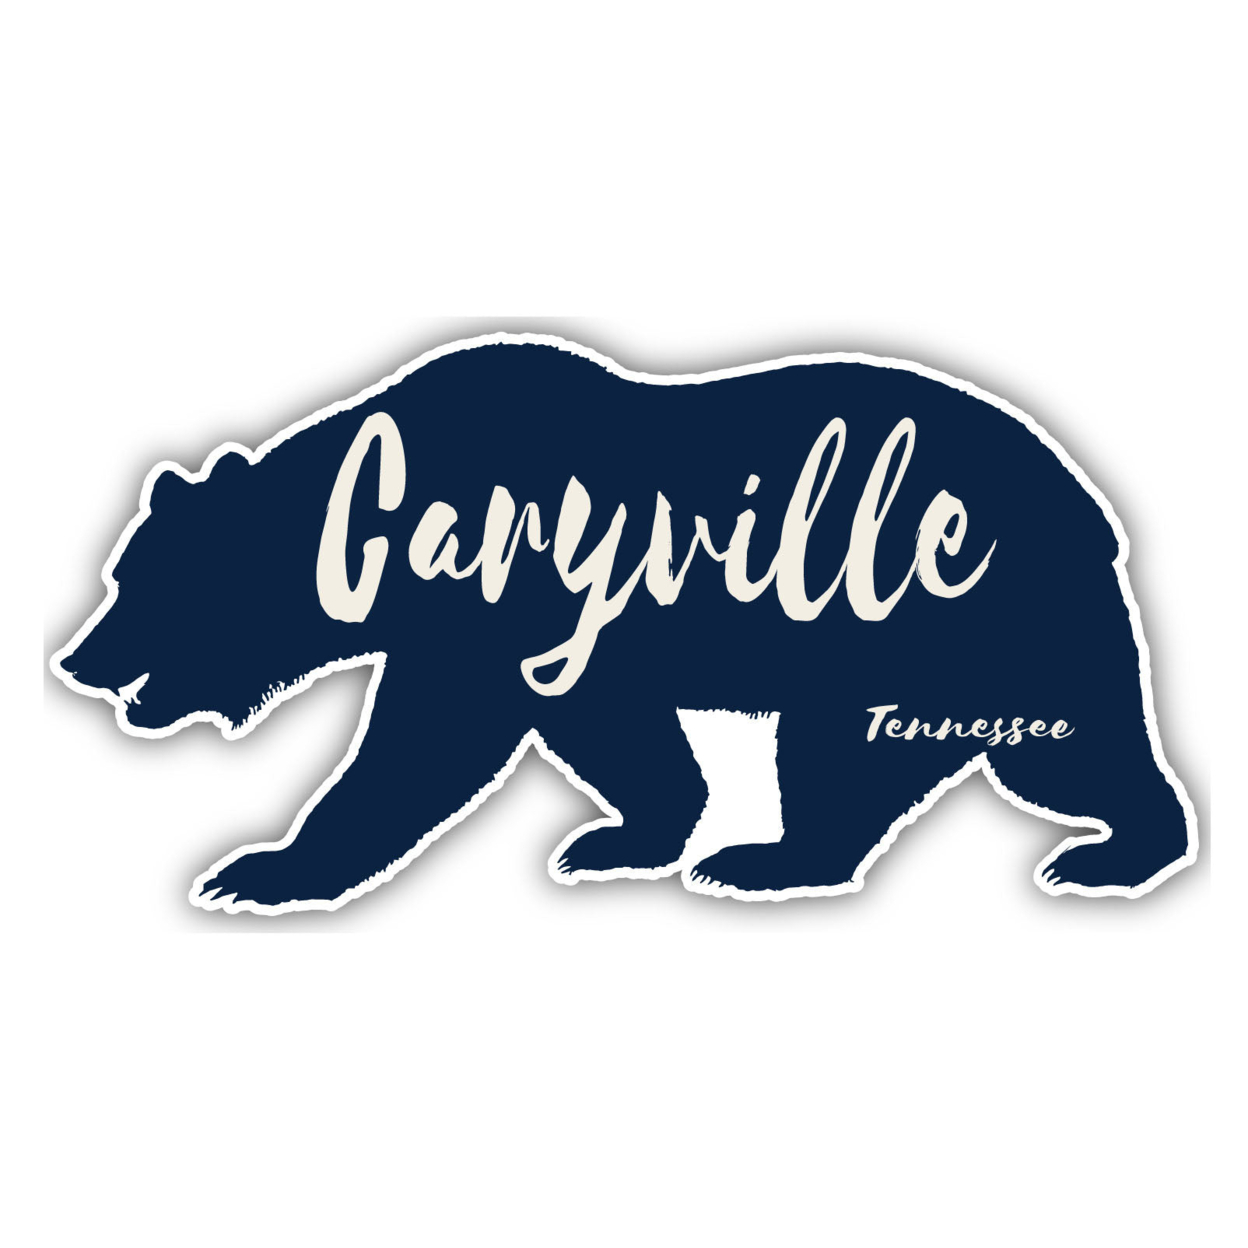 Caryville Tennessee Souvenir Decorative Stickers (Choose Theme And Size) - 4-Pack, 6-Inch, Tent